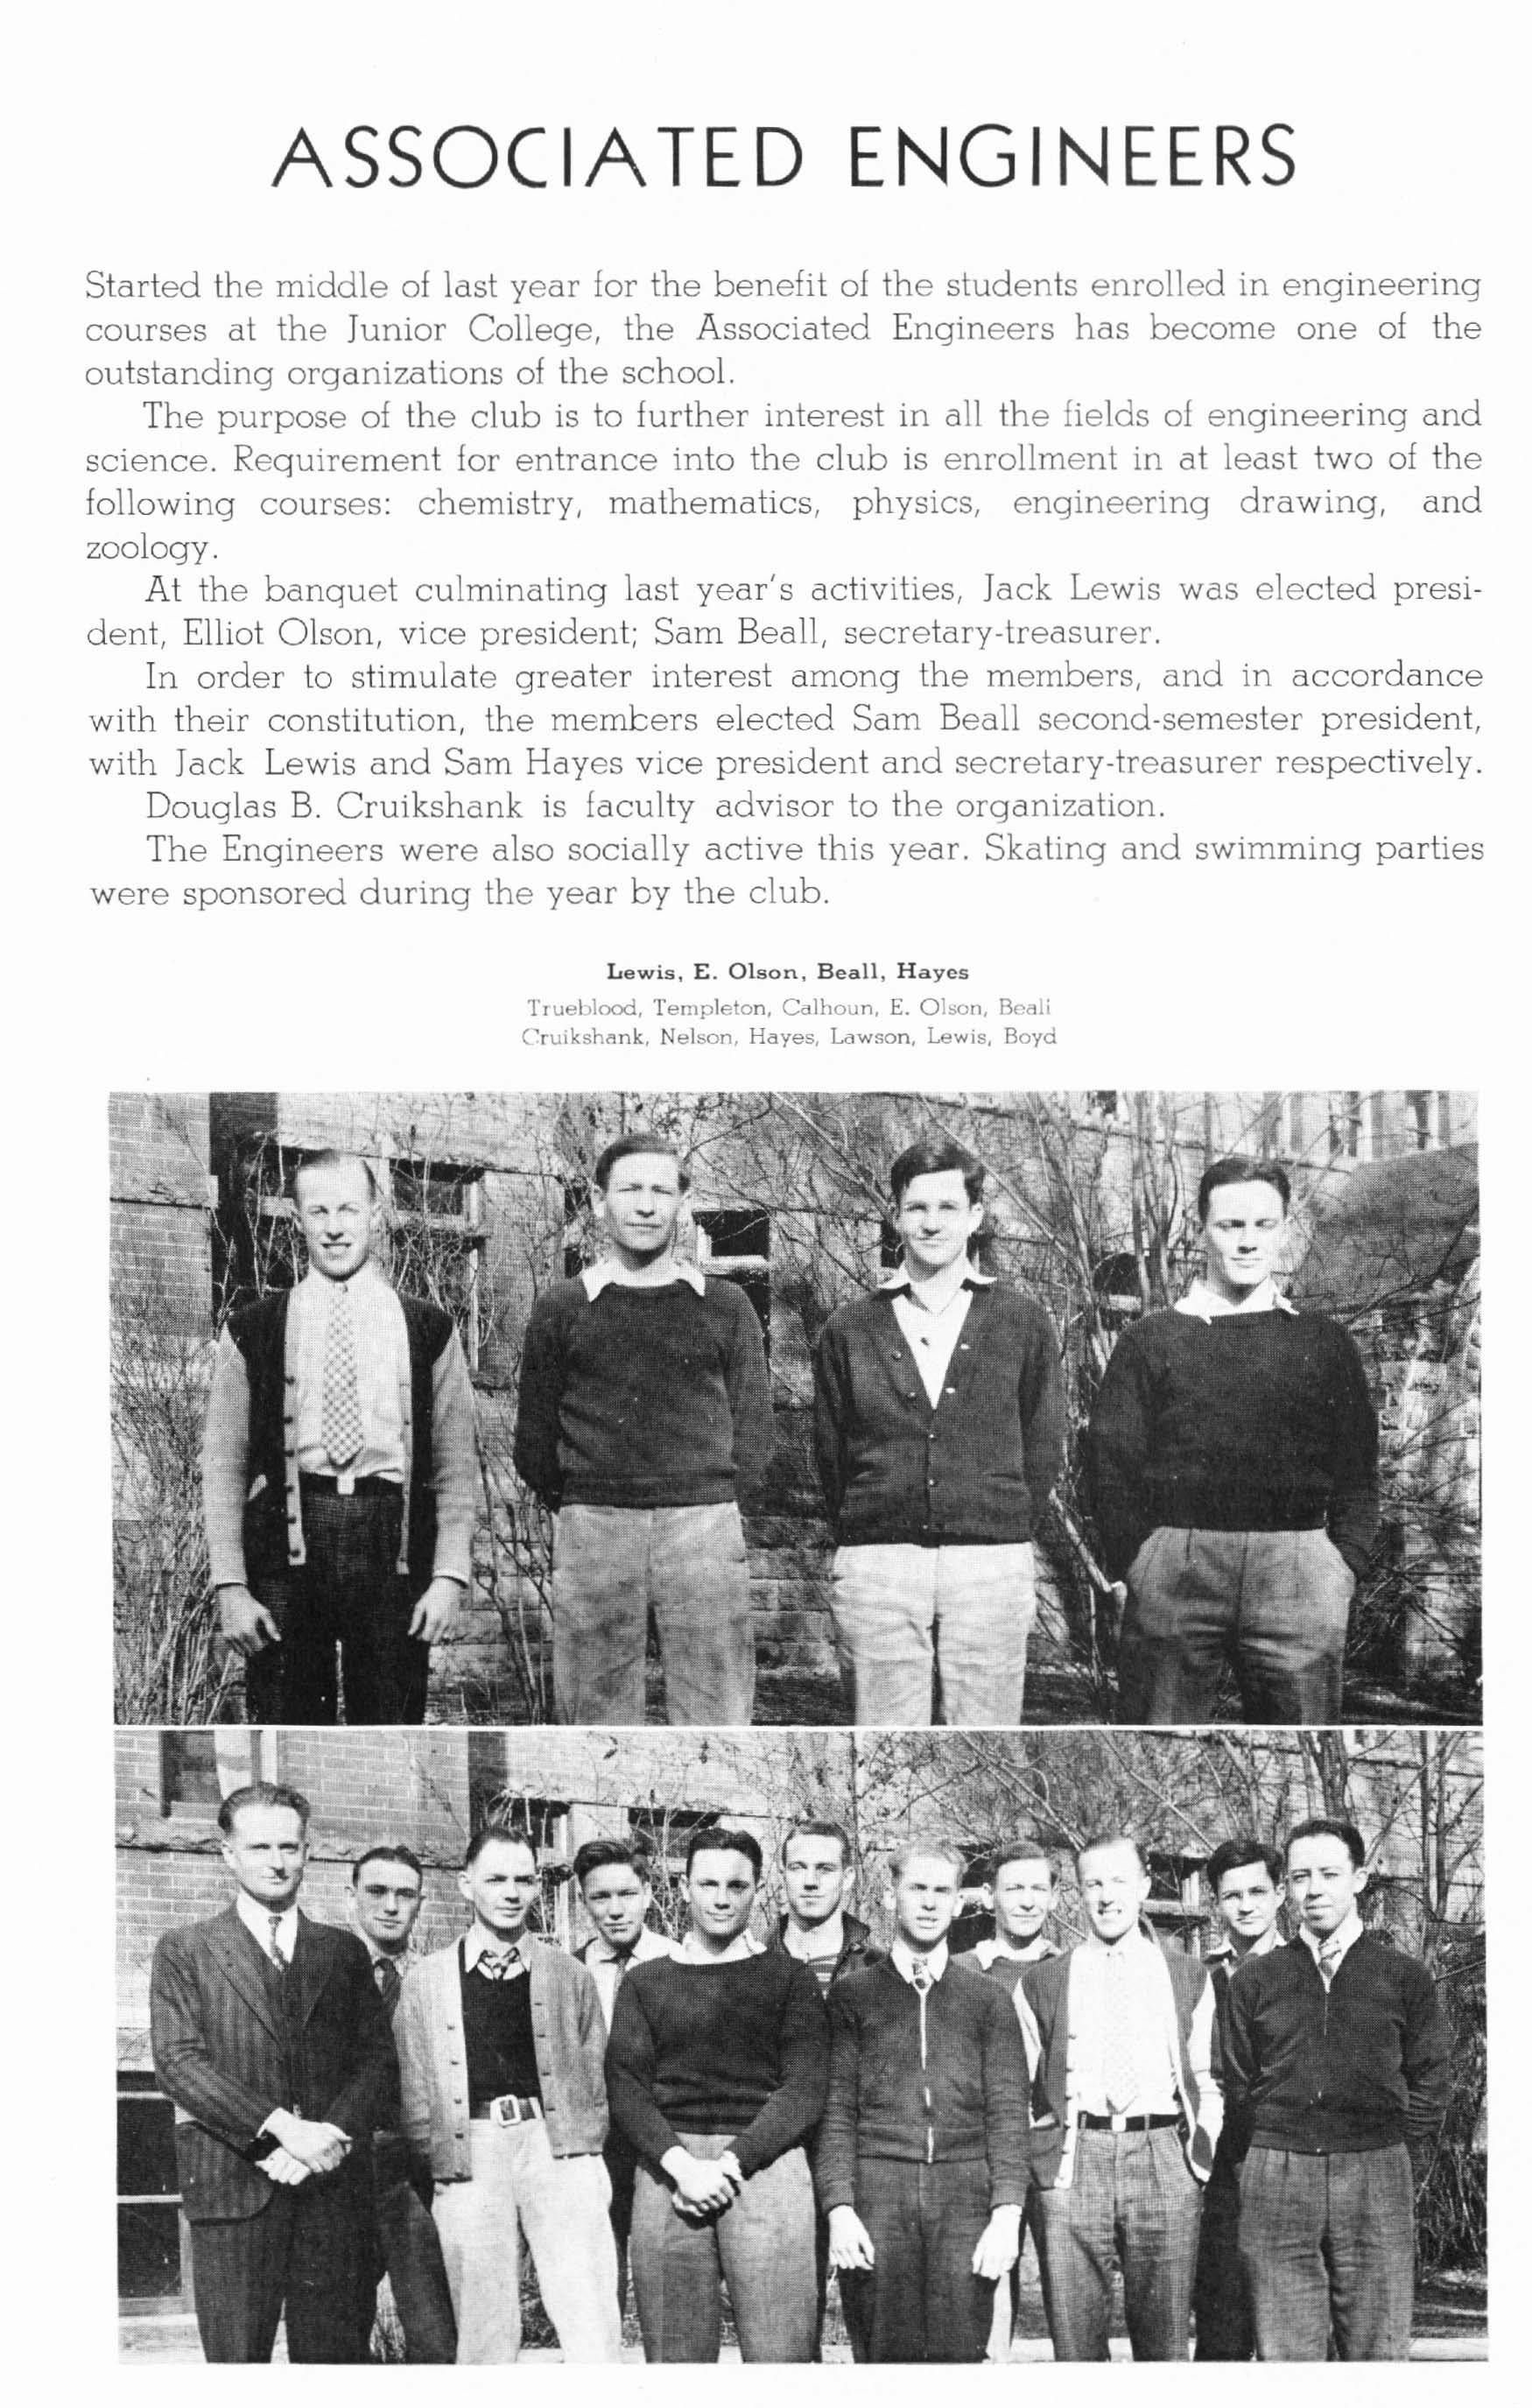 1938 yearbook page for the Associated Engineers student group including a group photo of club members